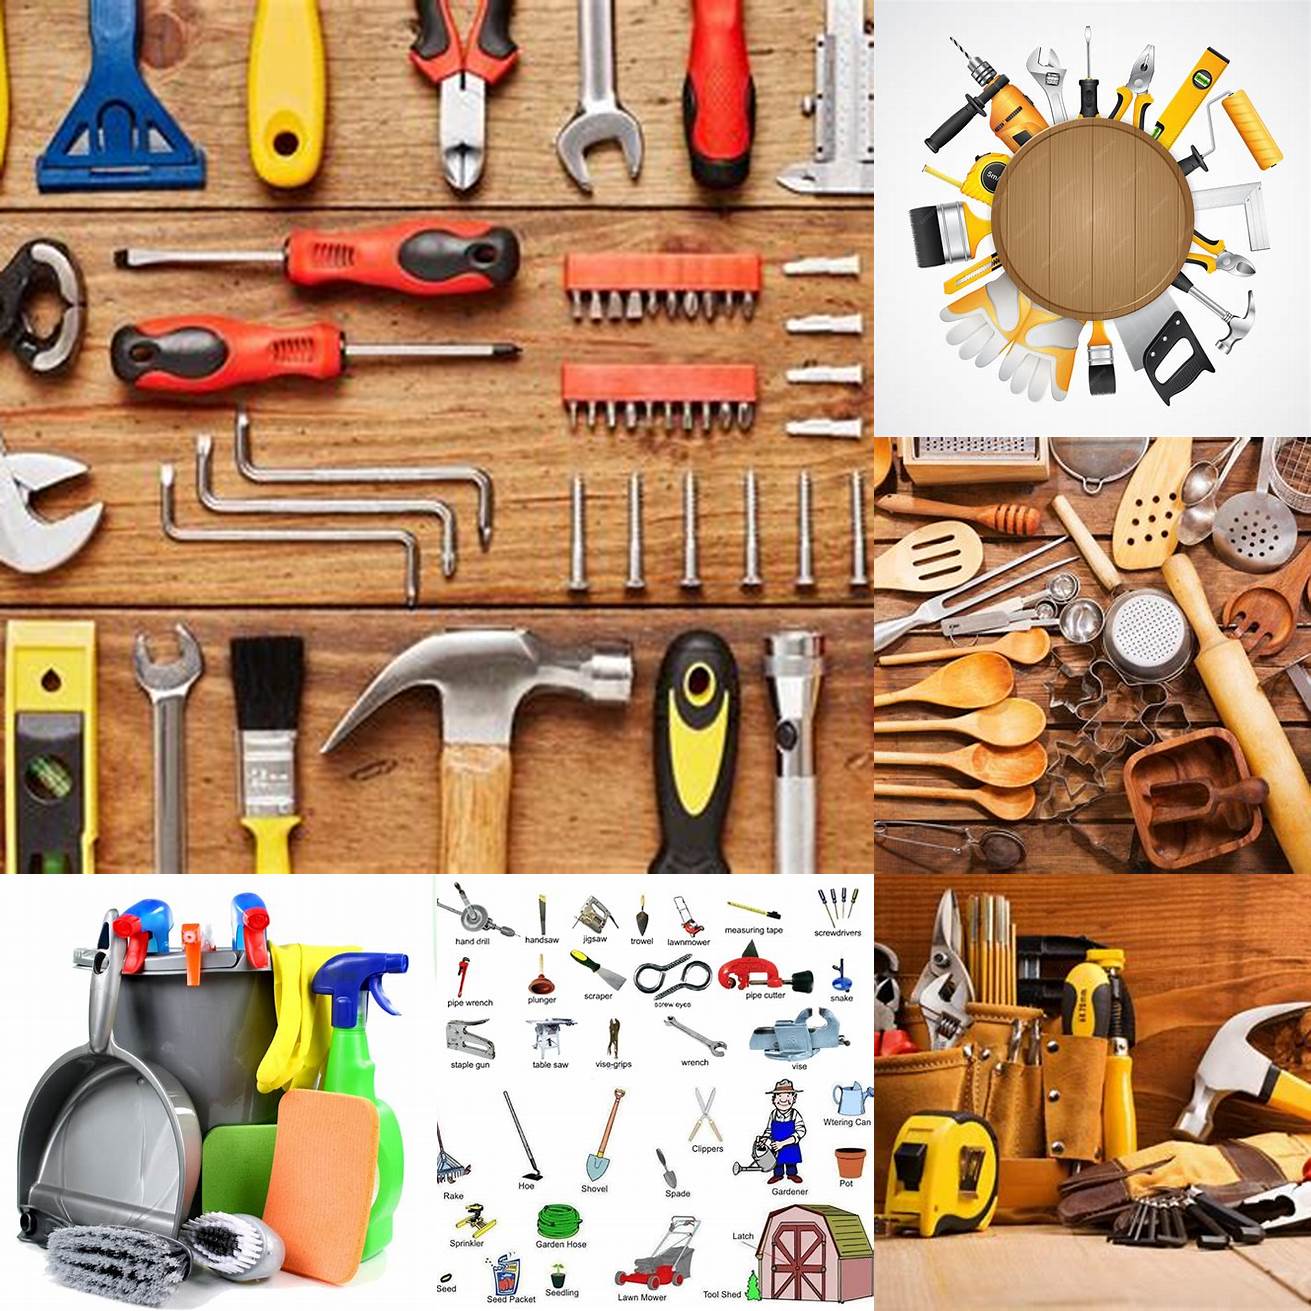 Tools and supplies